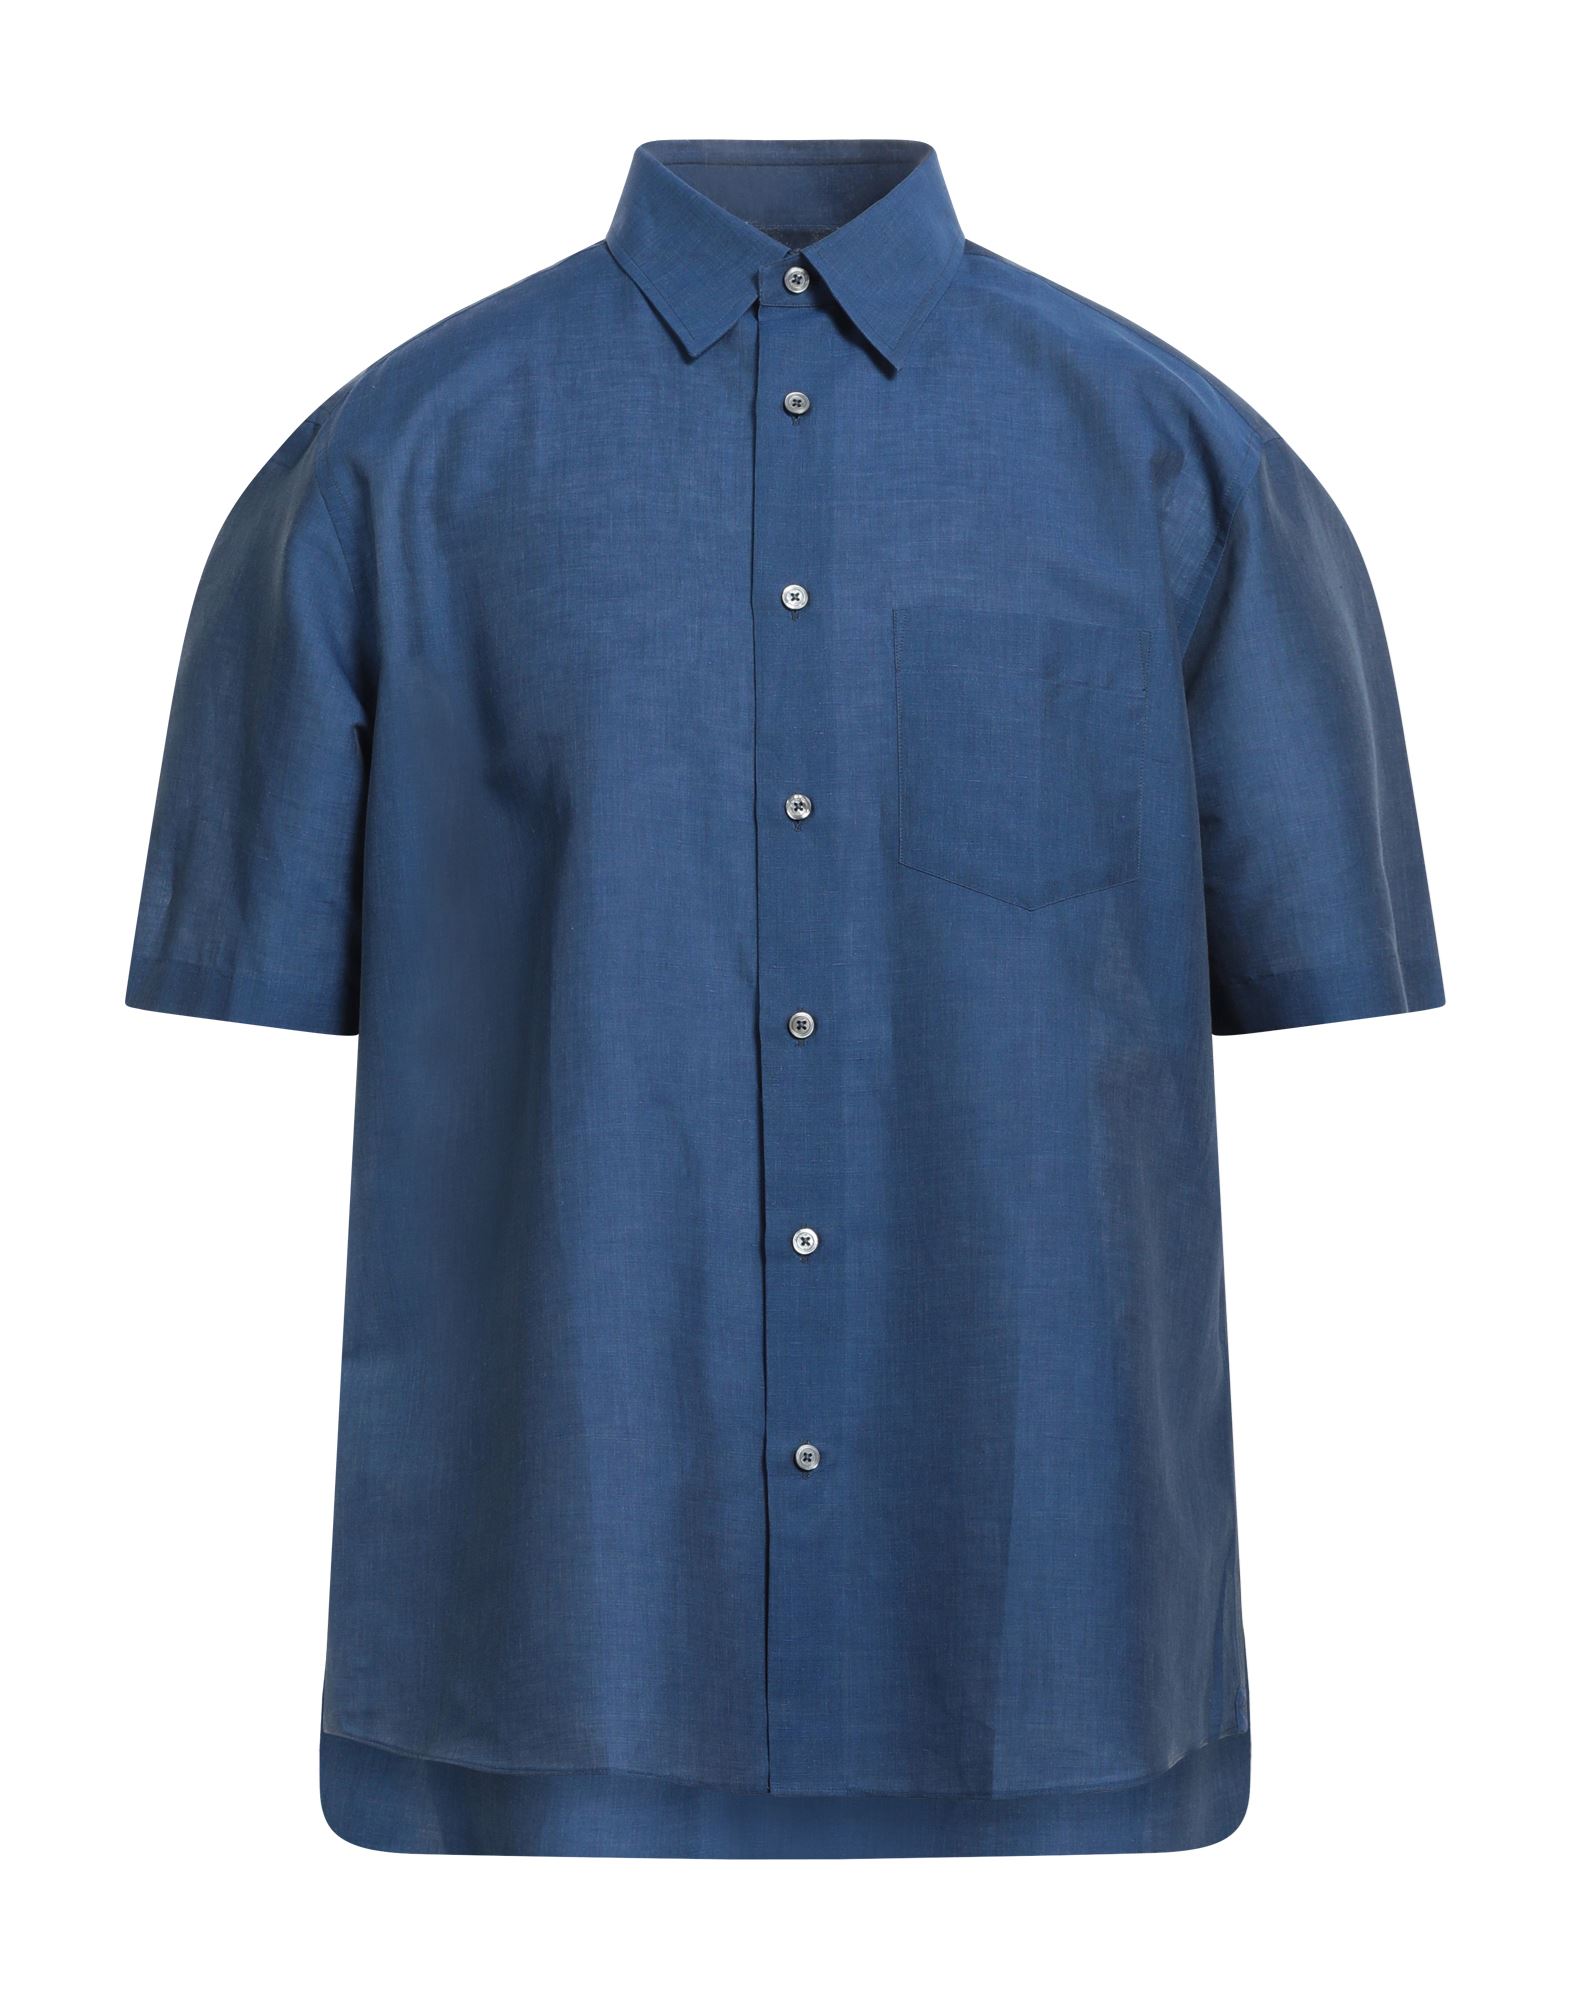 Dunhill Shirts In Navy Blue